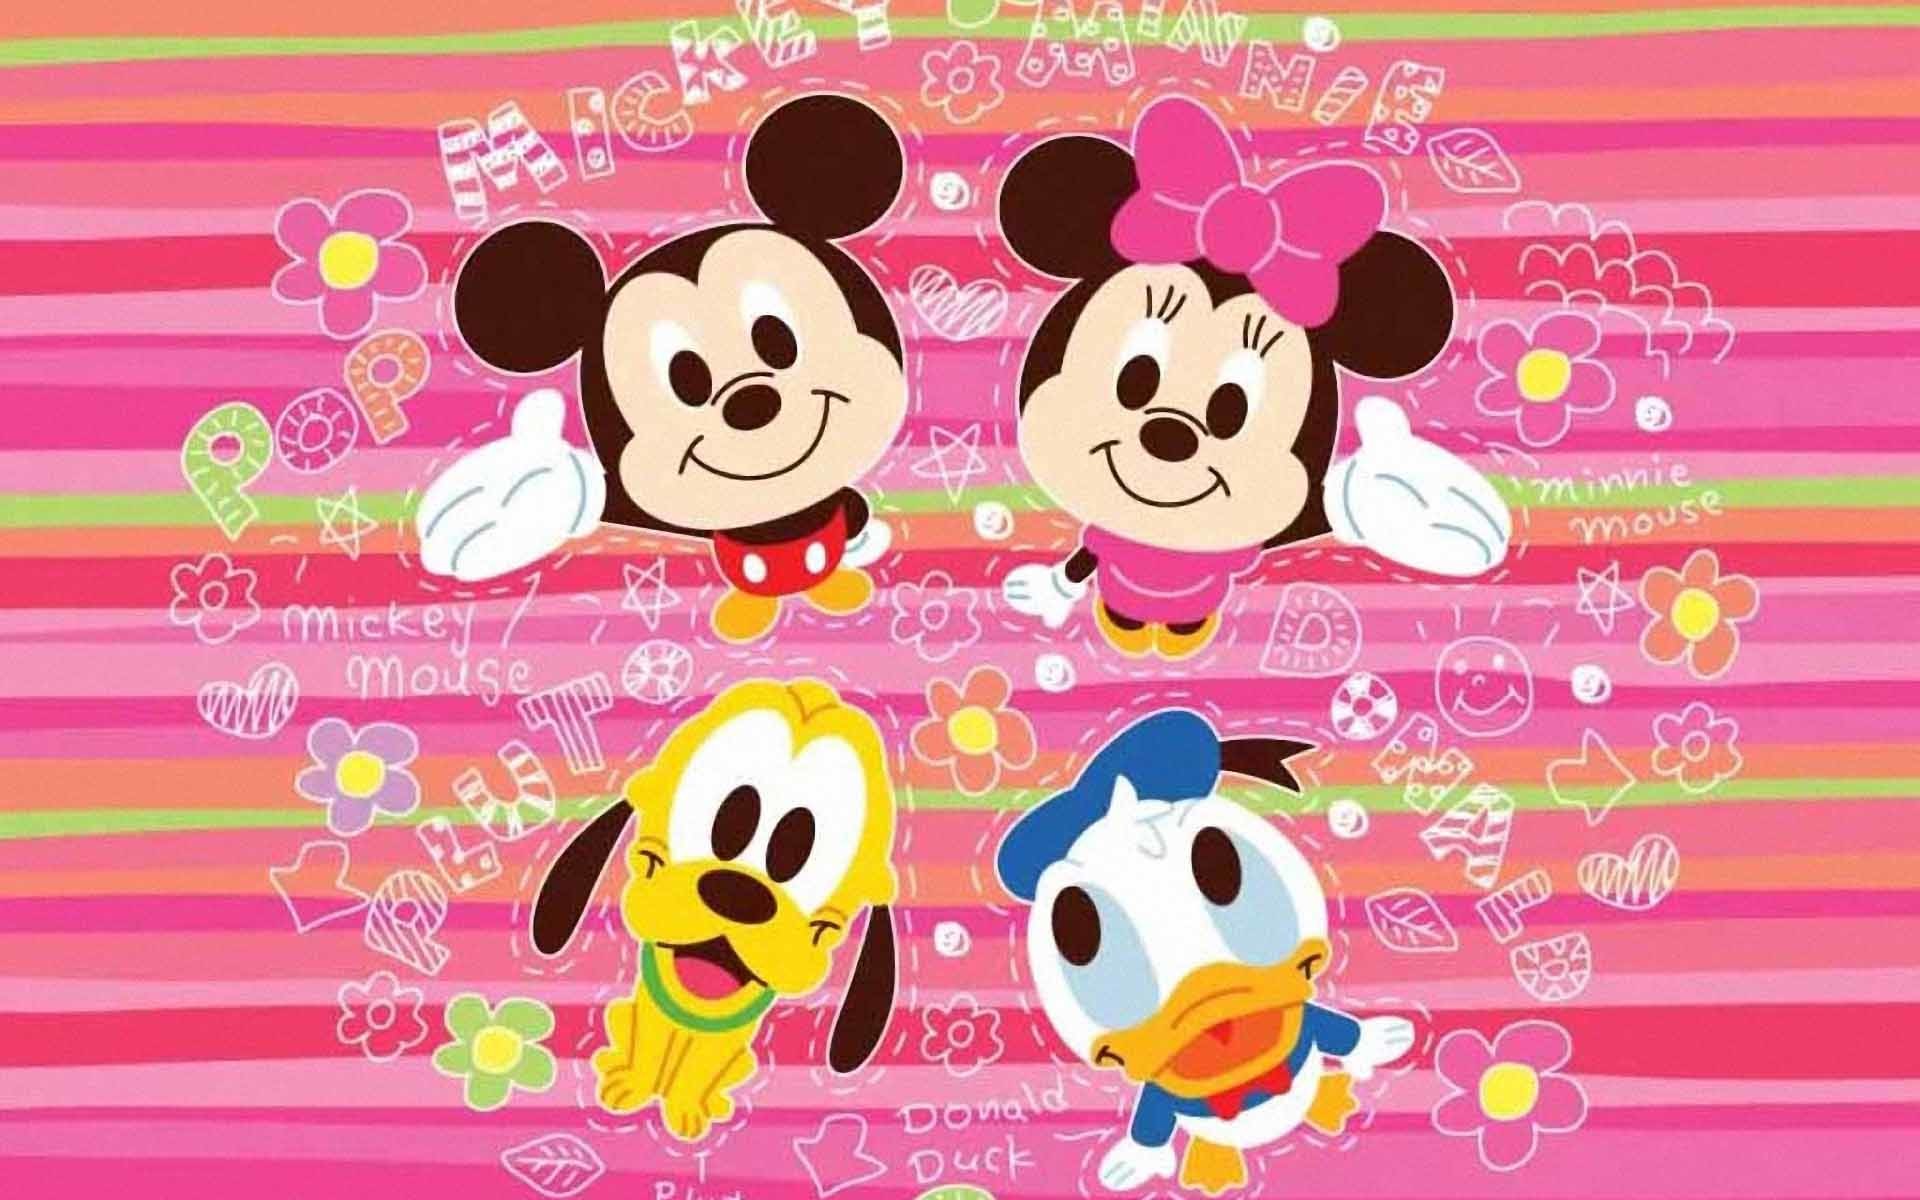 Black Mickey Mouse Wallpaper Images  Minnie Mouse Face Clipart Transparent  PNG  481x600  Free Download on NicePNG